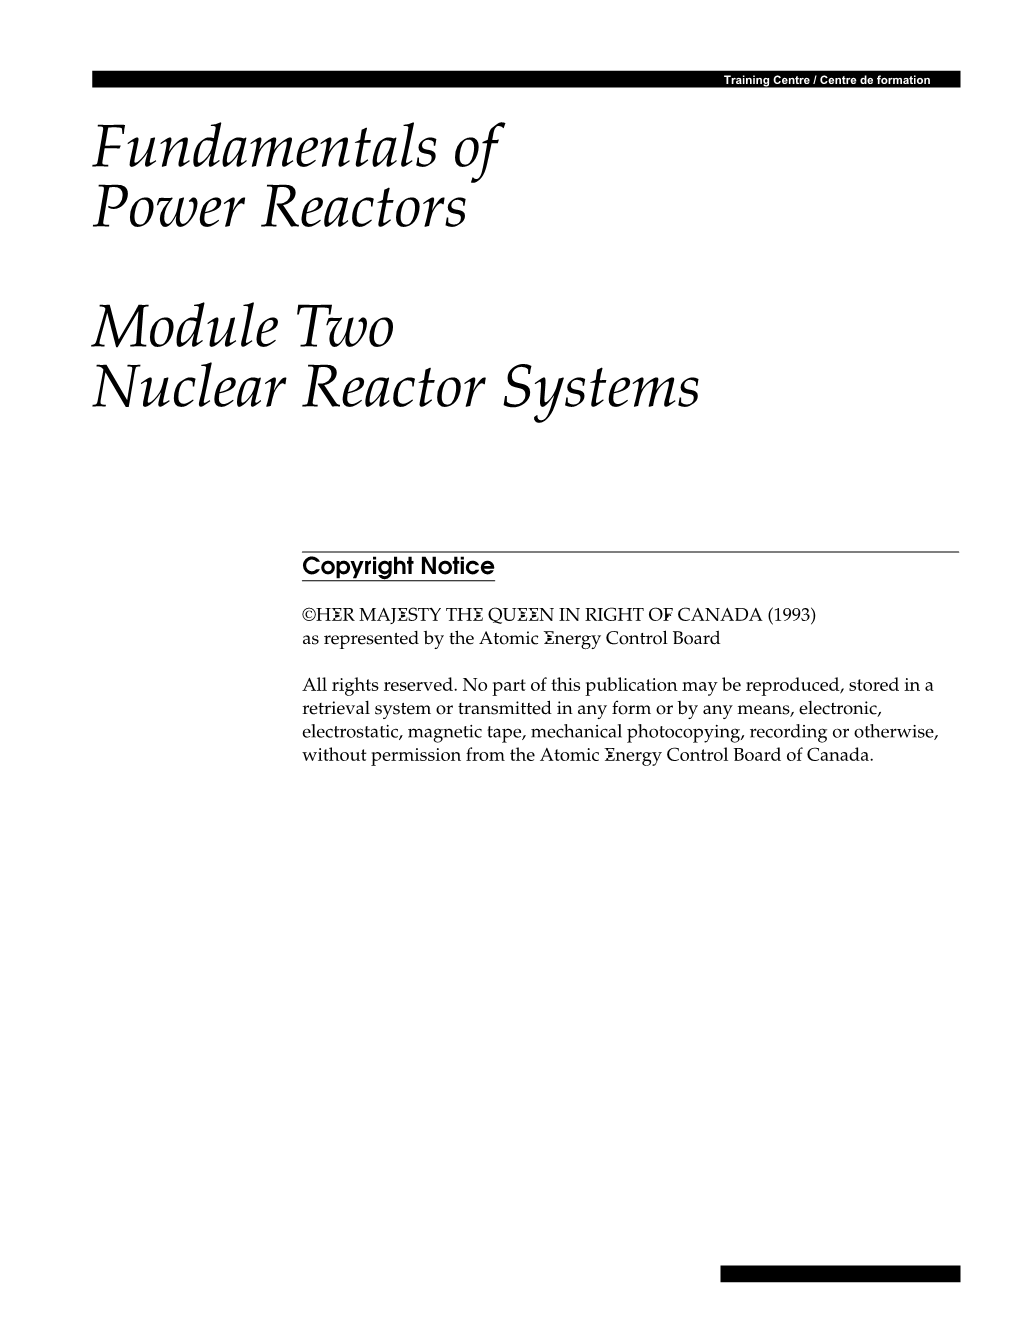 Fundamentals of Power Reactors Module Two Nuclear Reactor Systems